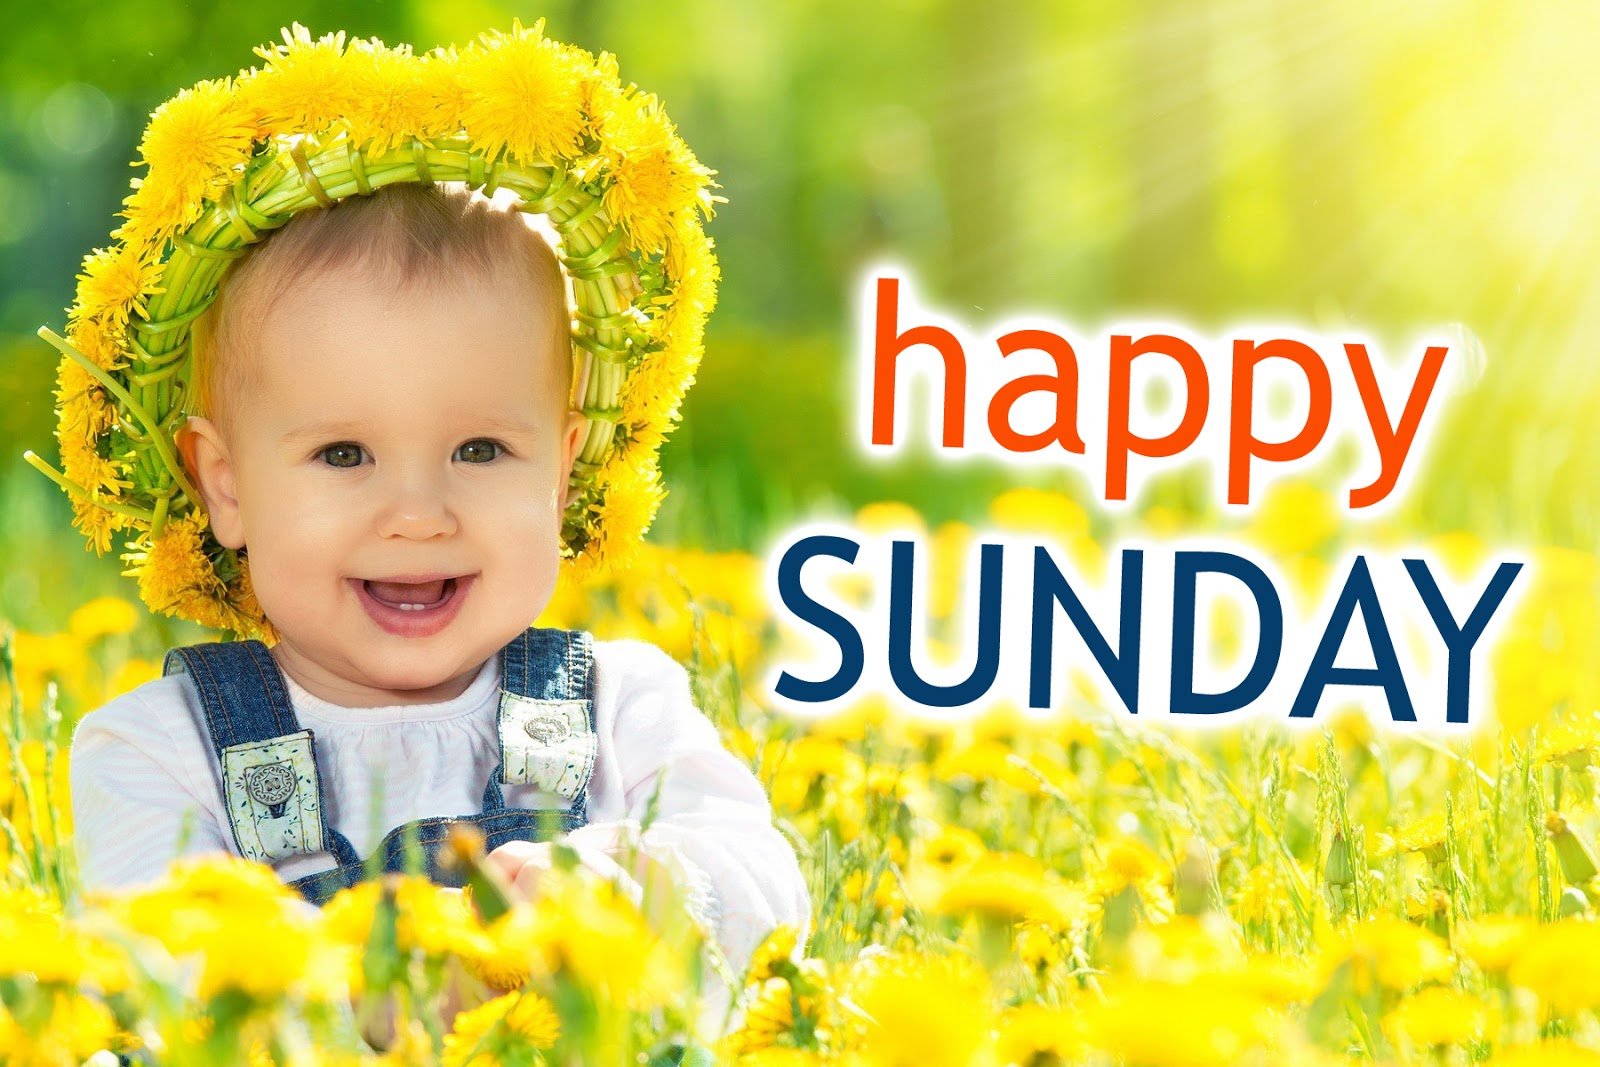 Top Sunday images, greetings and pictures for WhatsApp - ravigfx